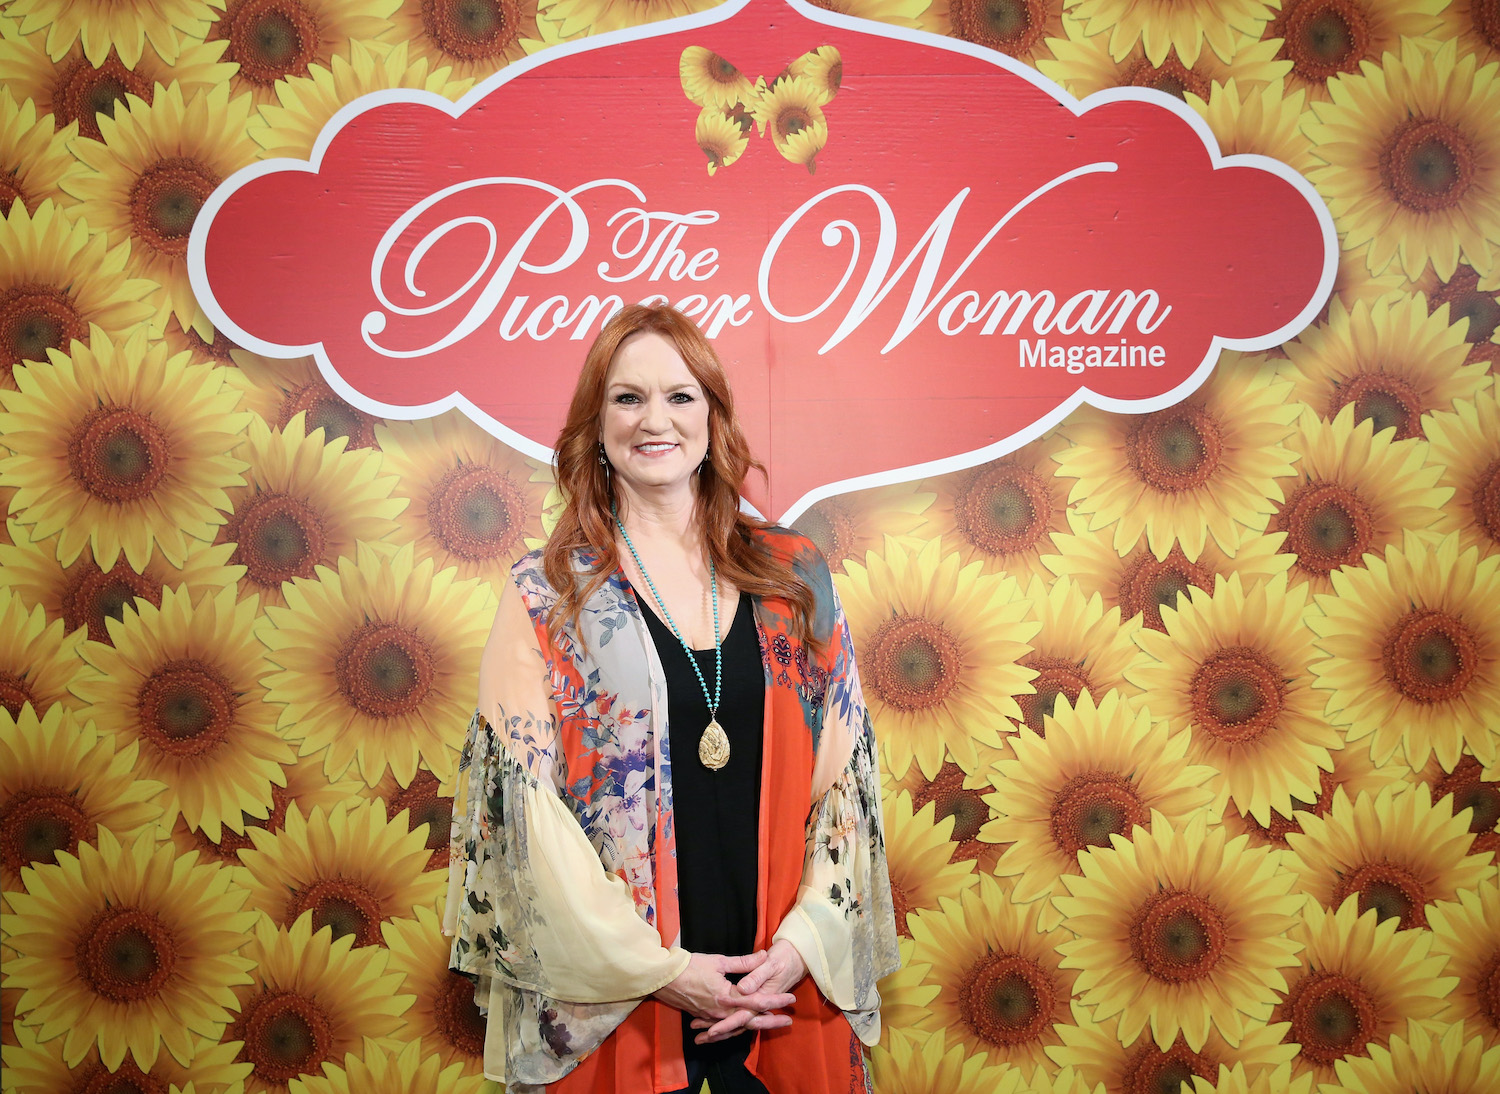 Ree Drummond attends The Pioneer Woman Magazine Celebration in 2017